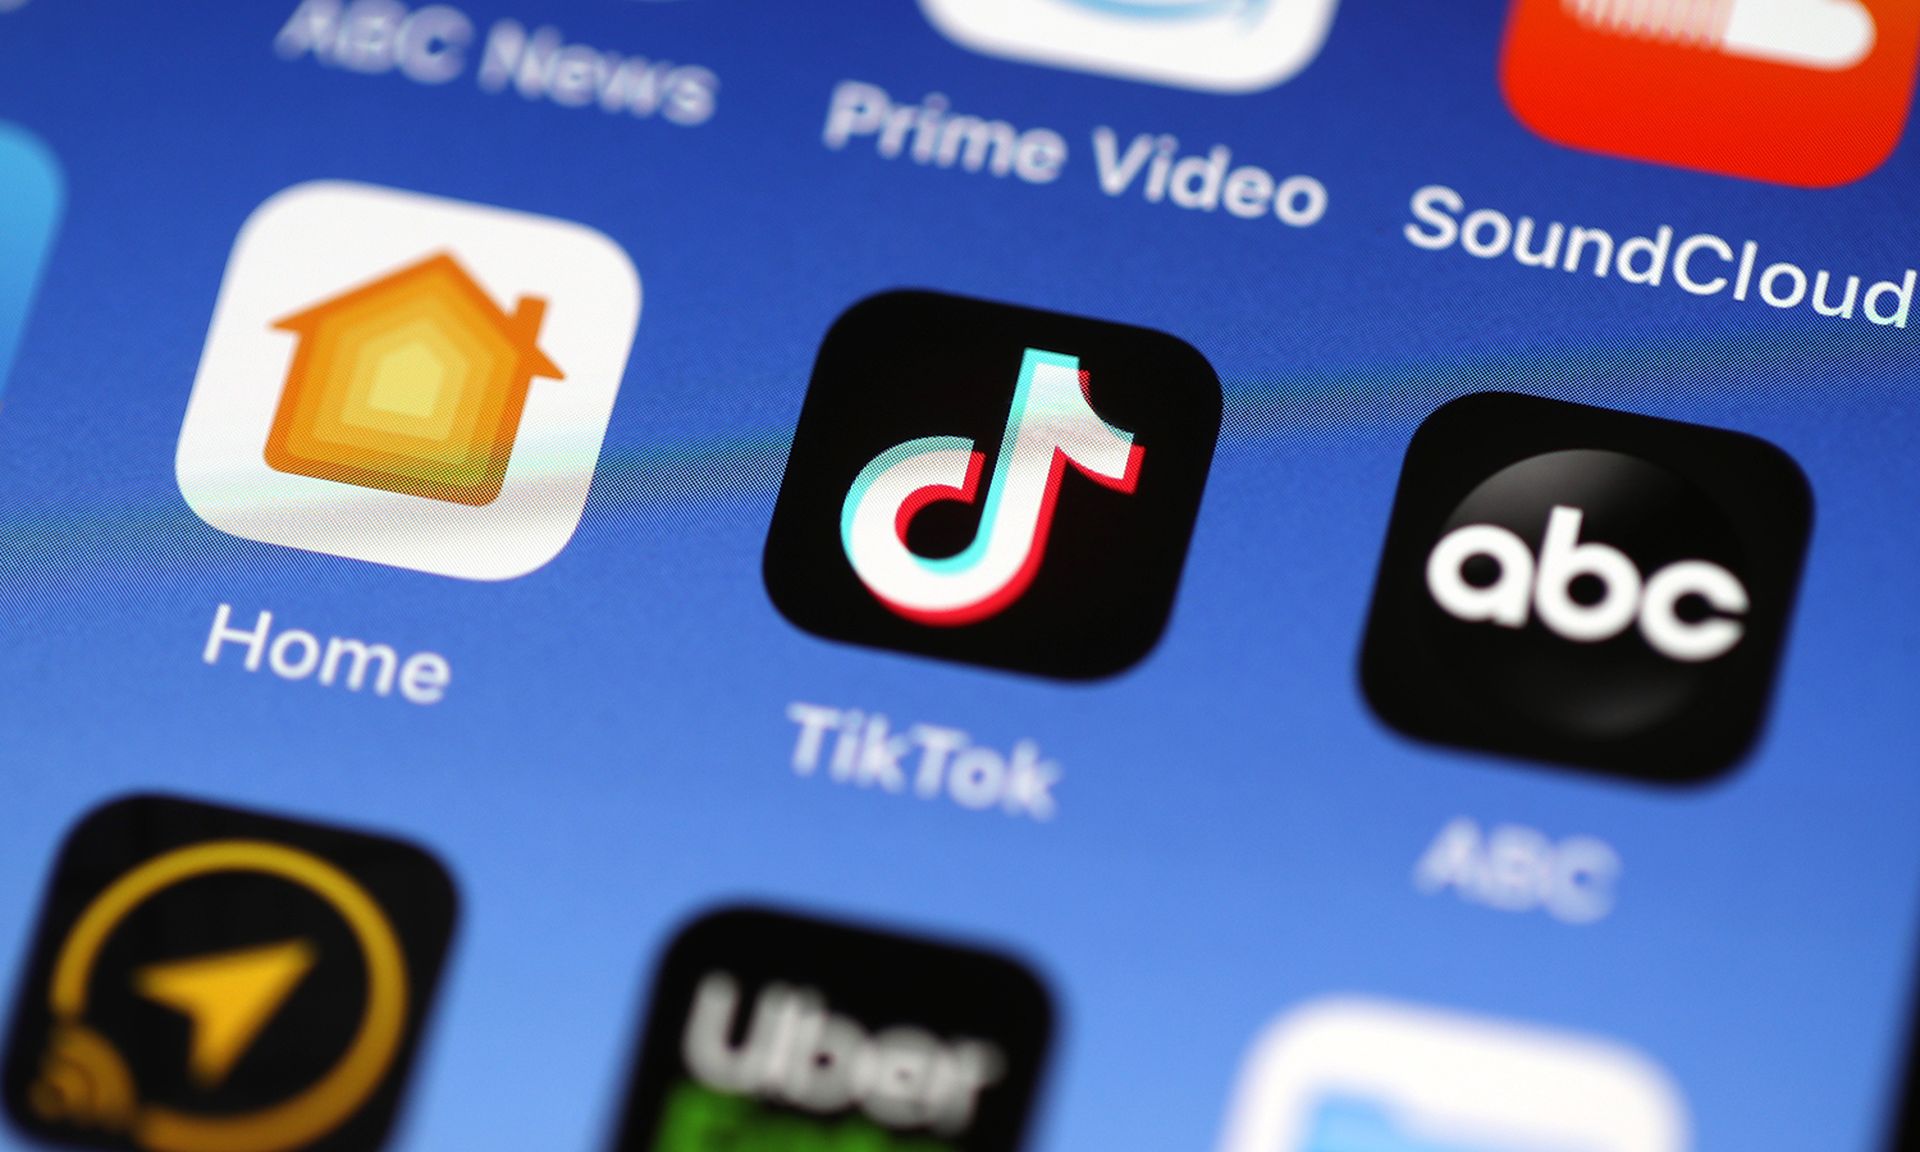 SAN ANSELMO, CALIFORNIA &#8211; NOVEMBER 01: In this photo illustration, the Tik Tok app is displayed on an Apple iPhone on November 01, 2019 in San Anselmo, California. The Committee on Foreign Investment in the United States (CFIUS) has started a national security investigation of social media app TikTok after Beijing ByteDance Technology Co acqu...